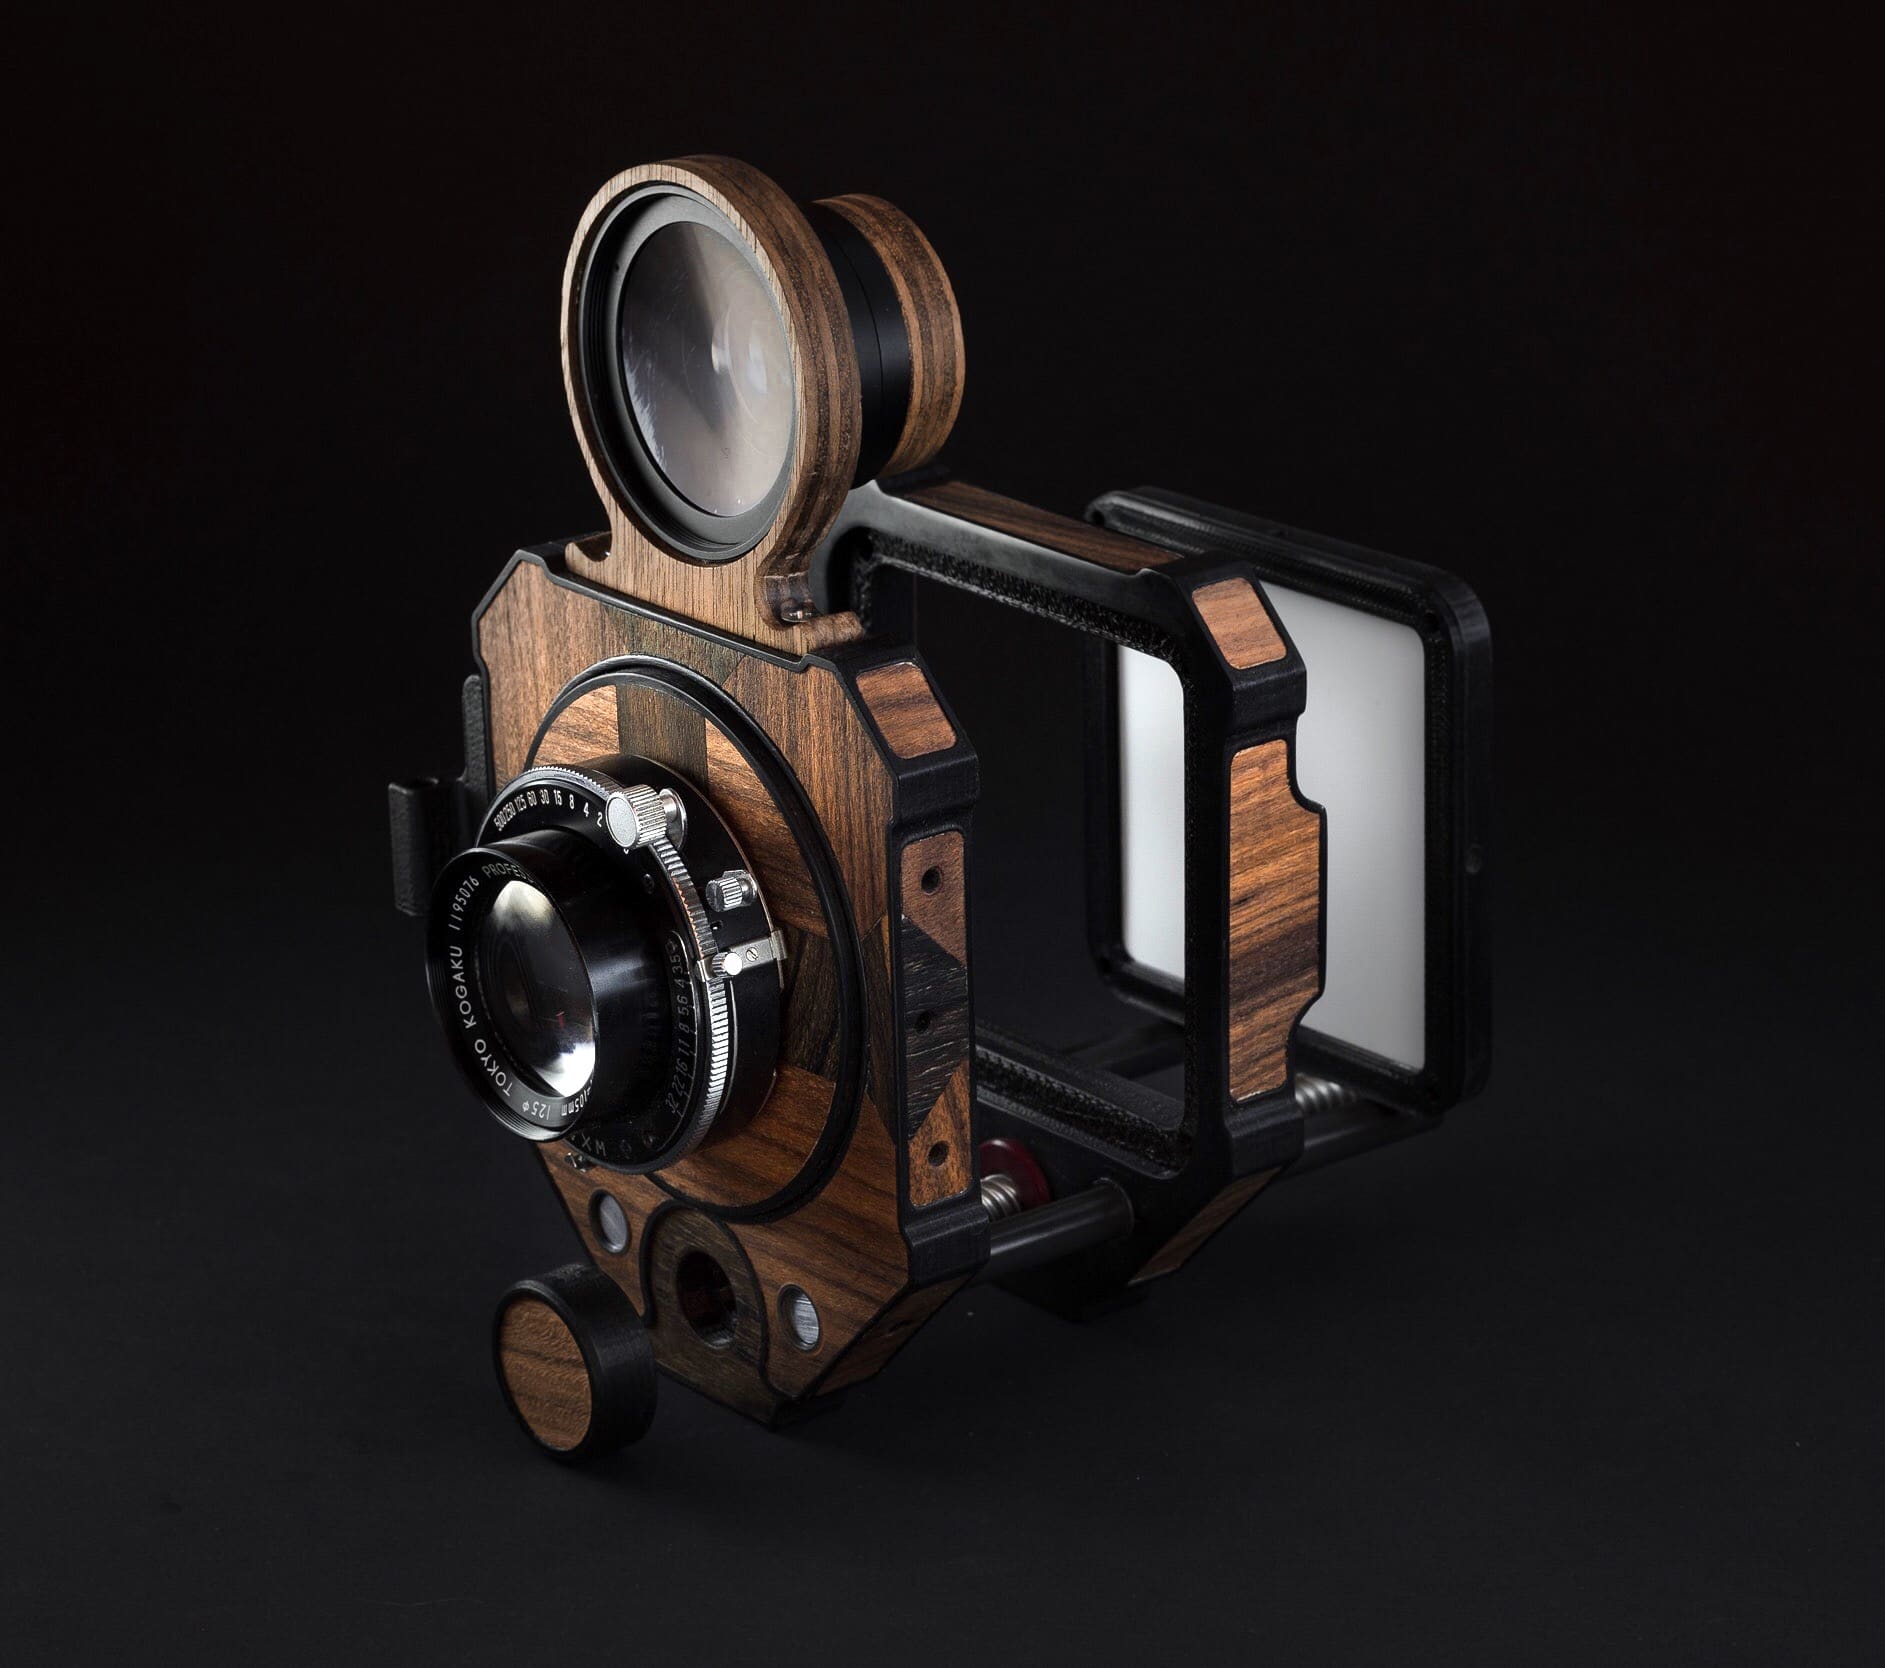 Open Source 3D Printed Analog Cameras – article on 3Dprint.com